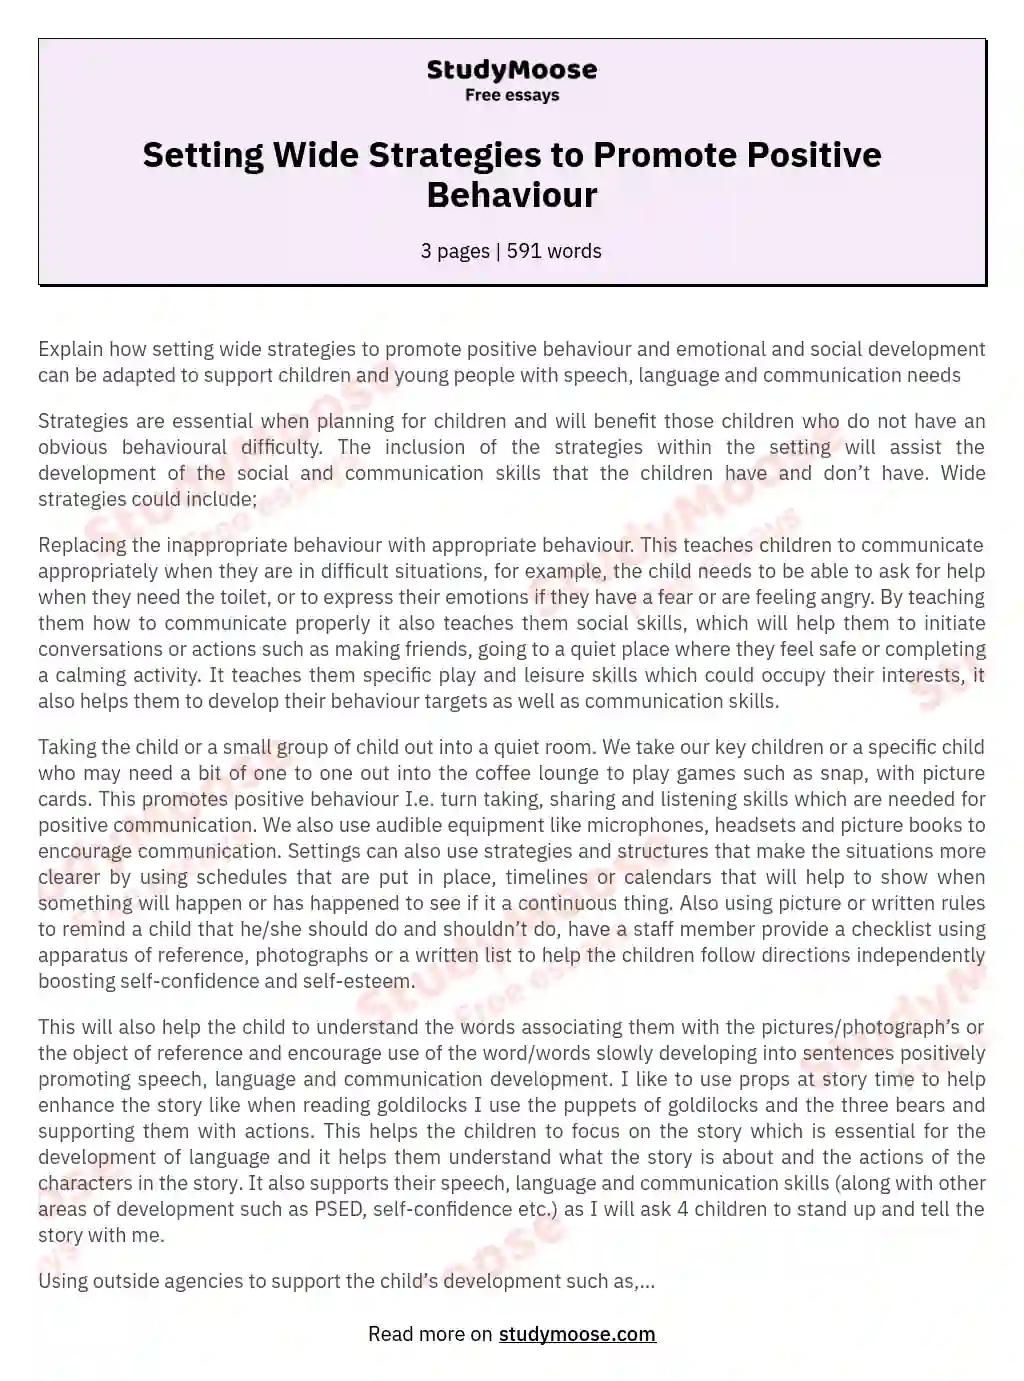 Setting Wide Strategies to Promote Positive Behaviour essay